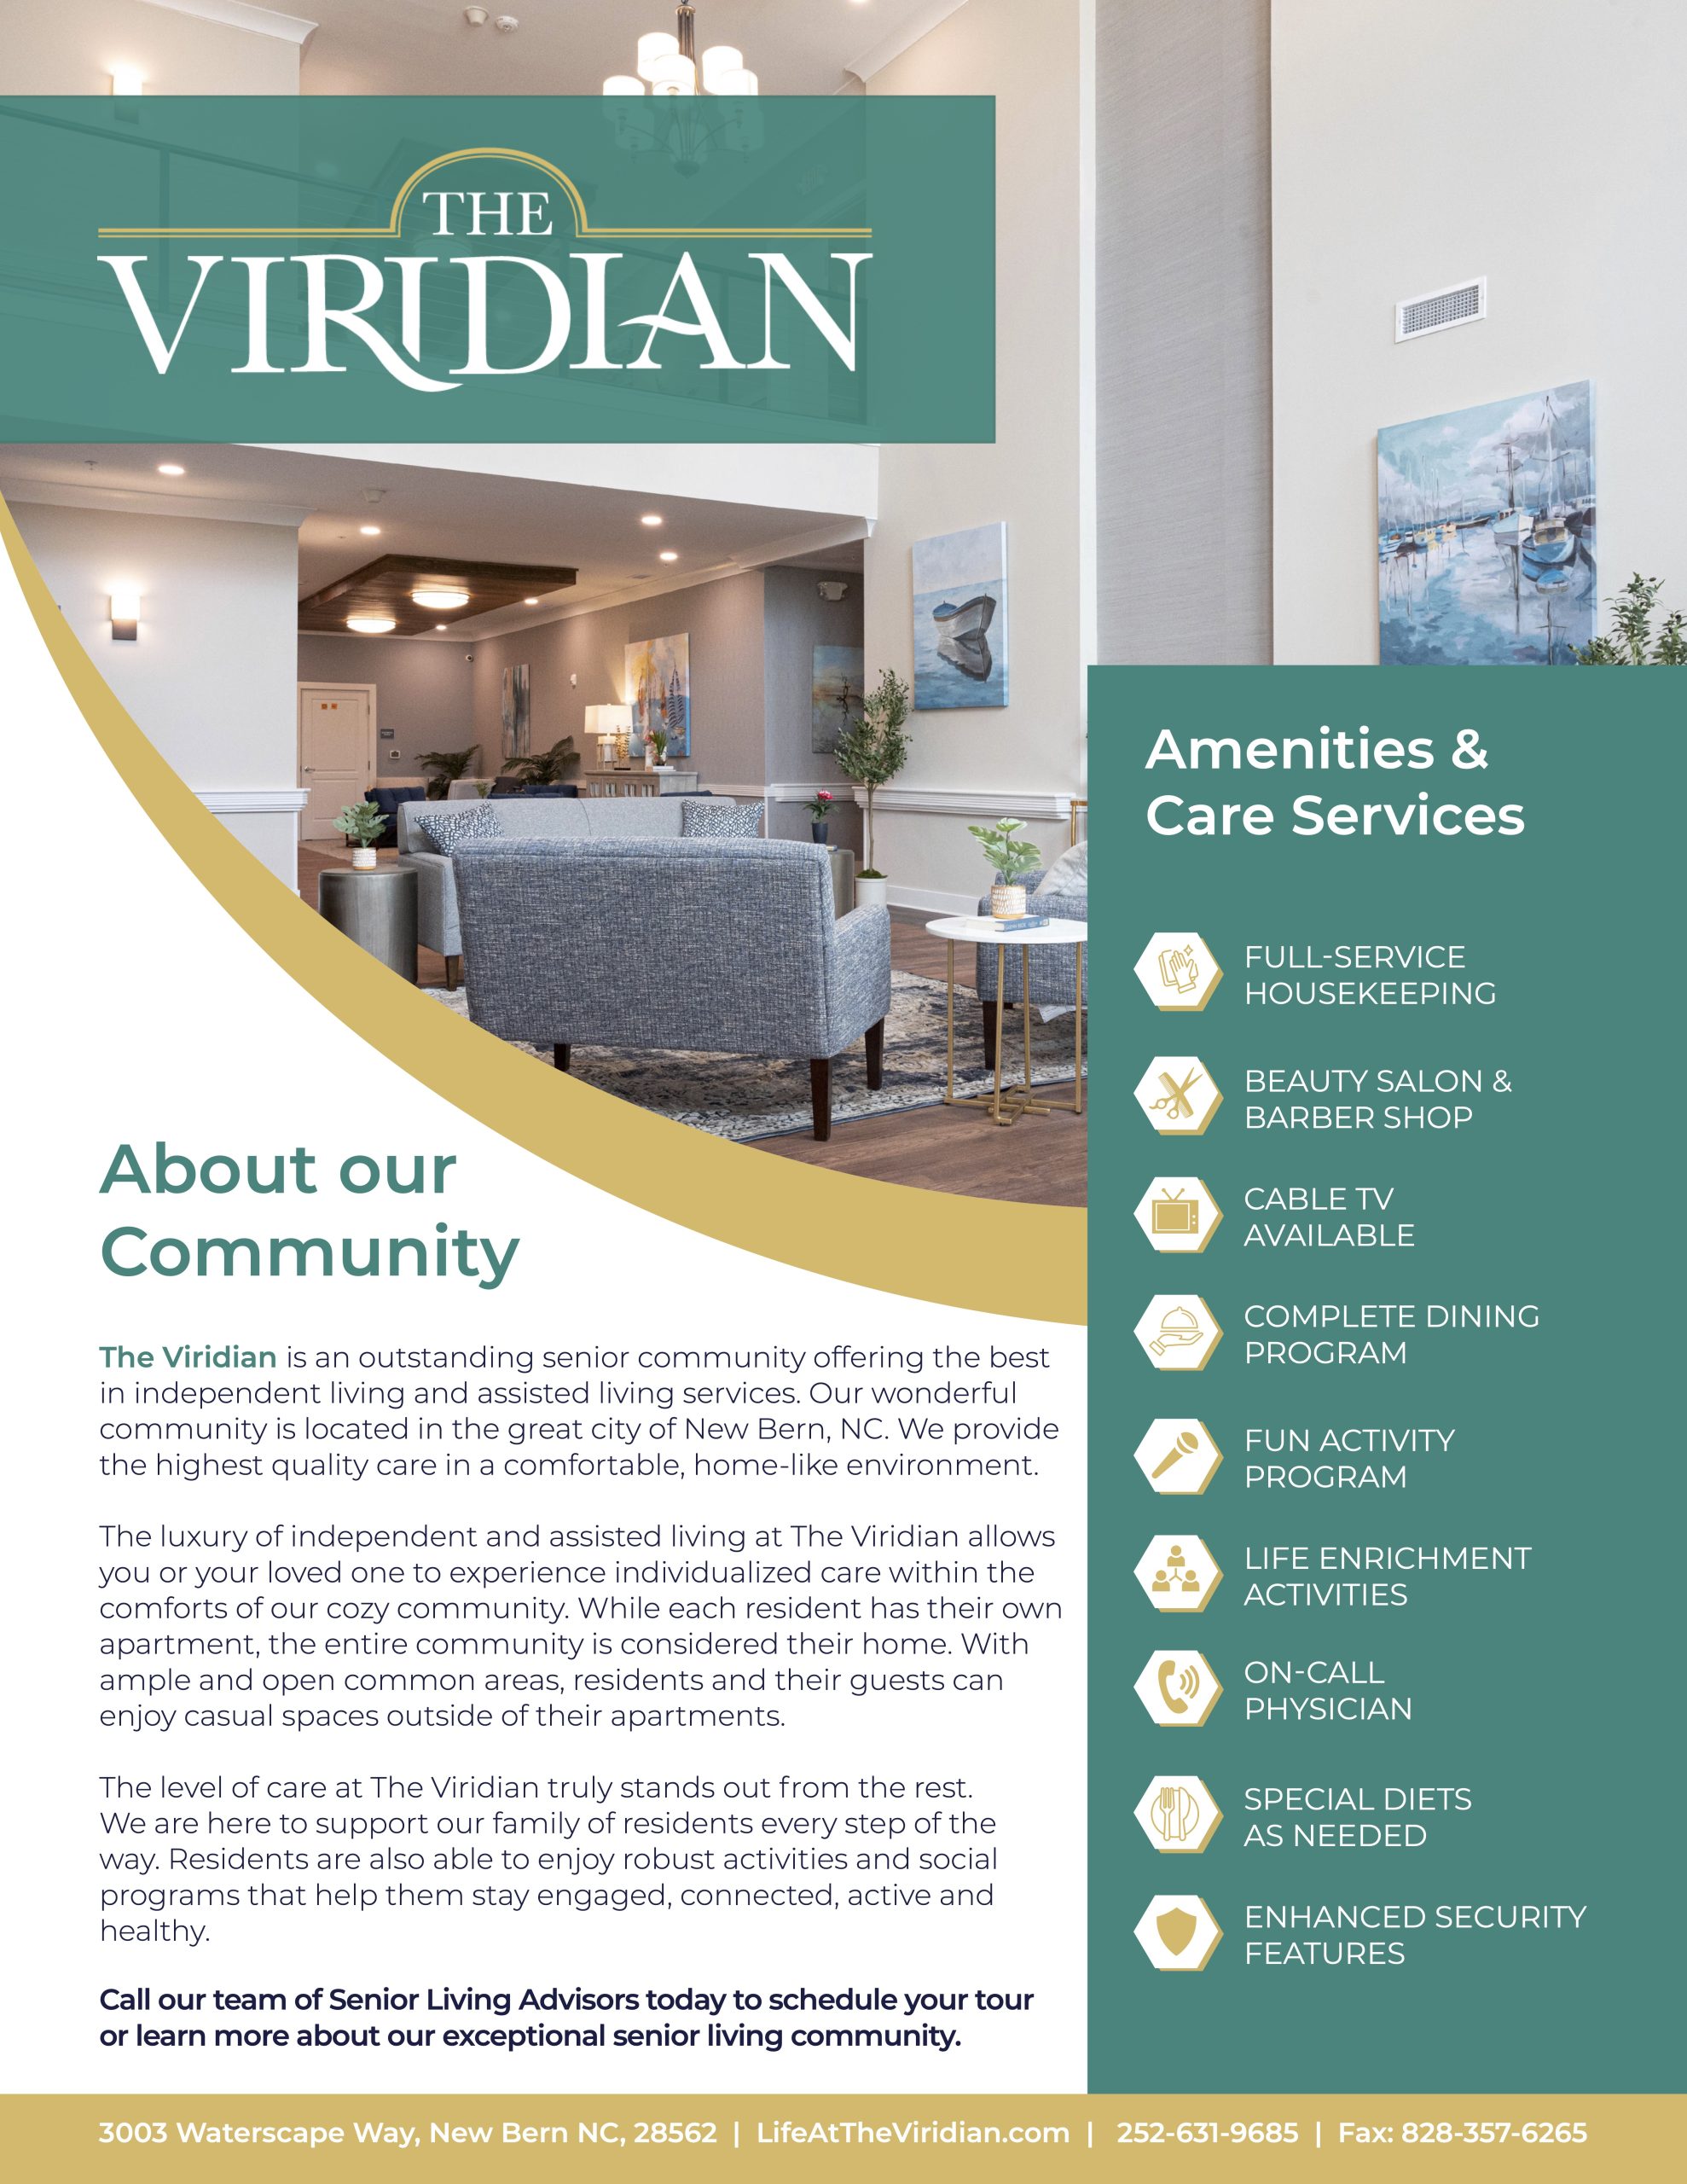 The Viridian - About our Services